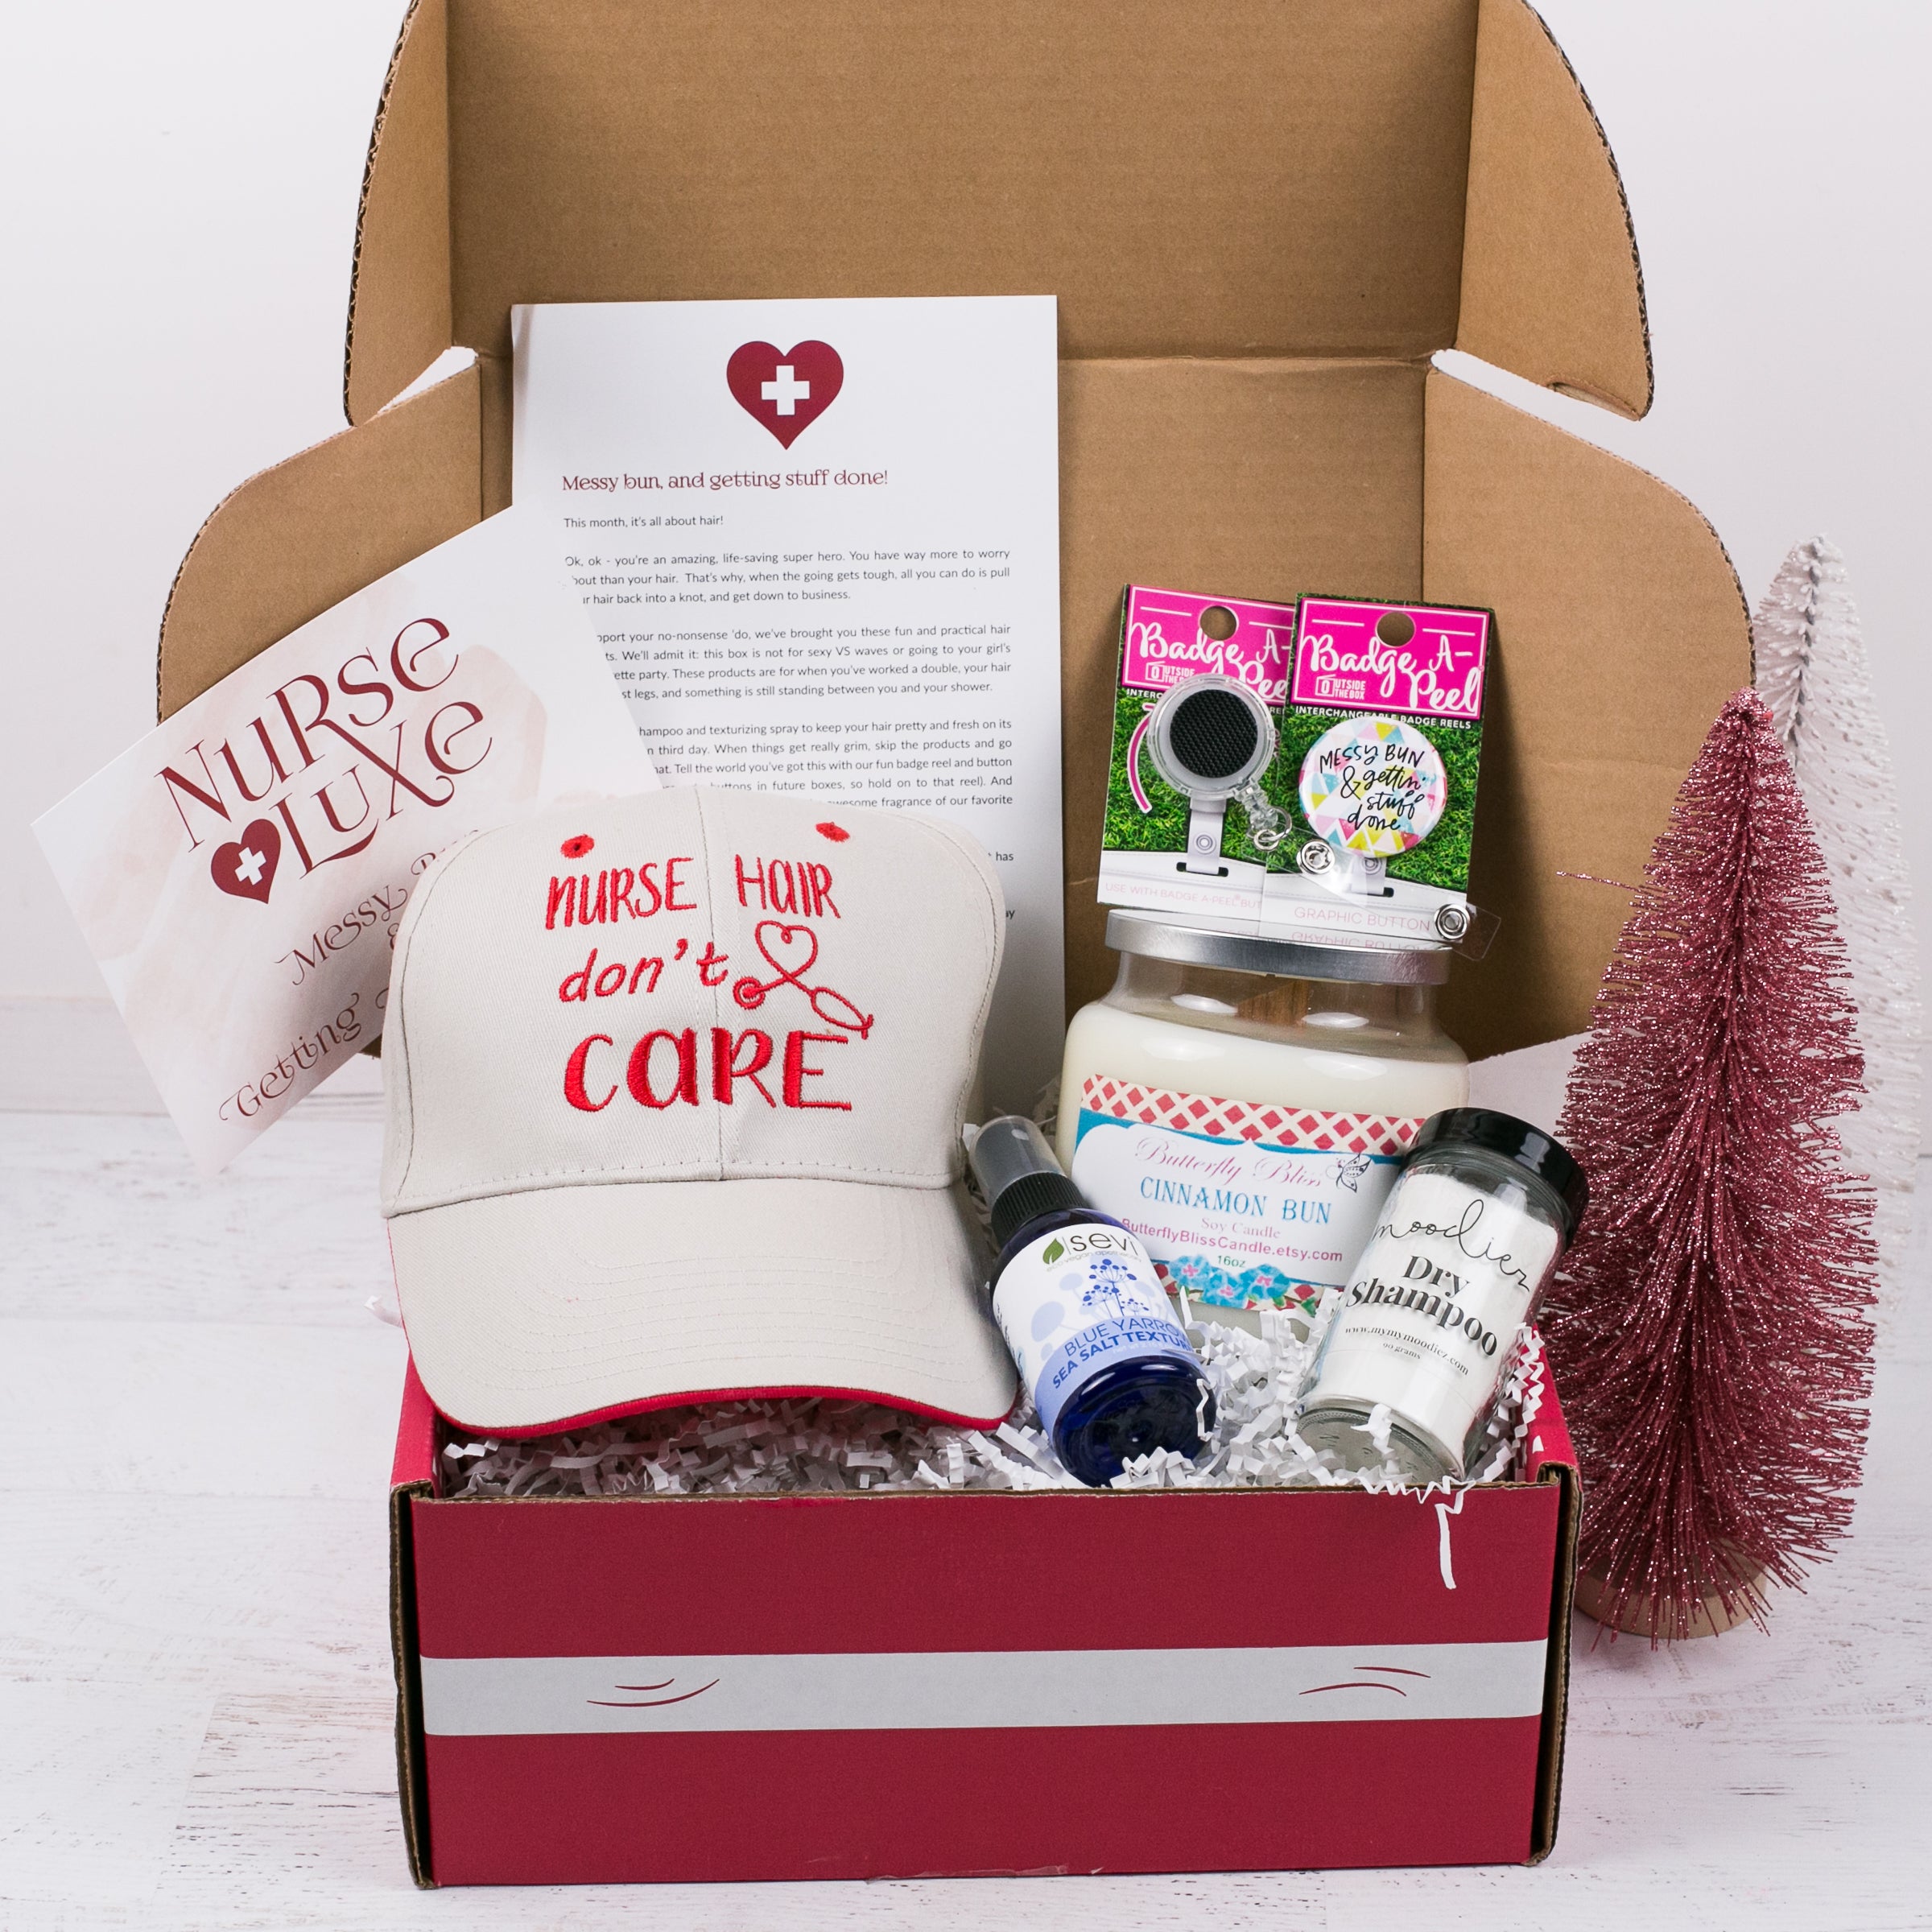 10 Thank You Gifts to Give Your Nurses in Labor & Delivery